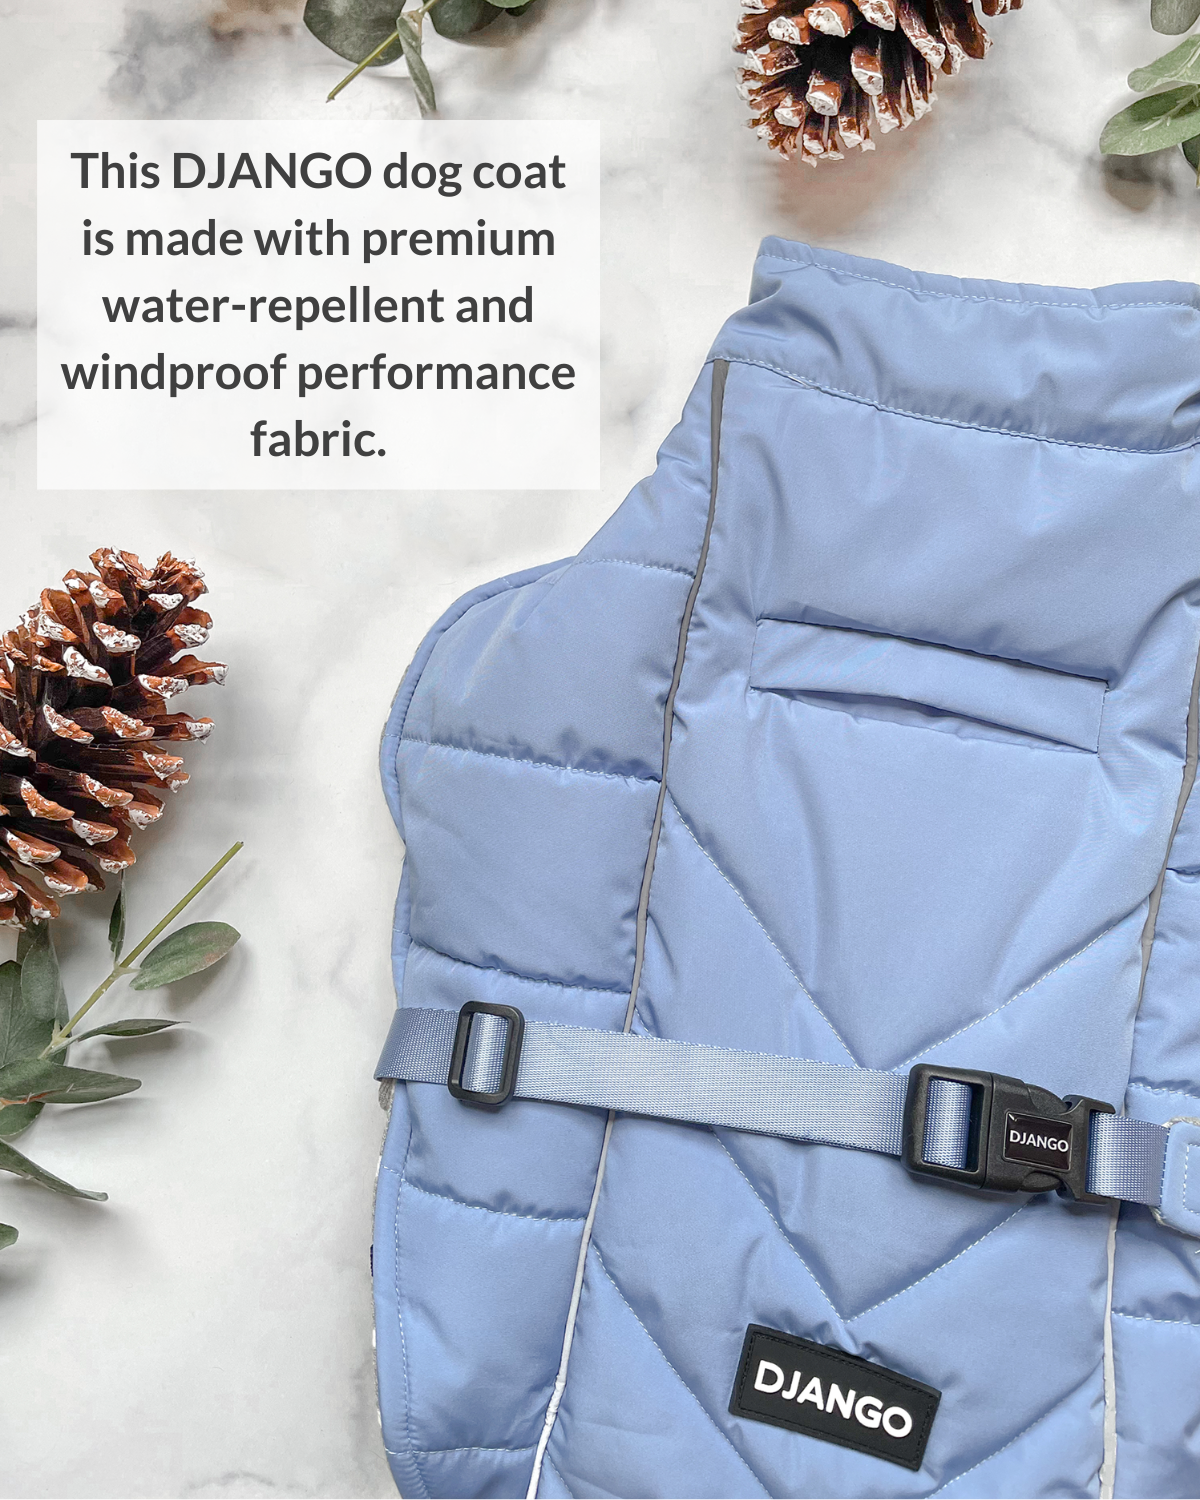 DJANGO's Whistler Winter Dog Coat is a warm and comfortable cold weather dog parka. Insulated for the coldest winter weather, this alpine-inspired puffer dog coat features a windproof and water-repellent exterior, a soft and cozy interior lining, and reflective piping for low light adventures. An adjustable webbing chest strap and velcro neck closure allow for easy on-off and a tailored fit around your dog's body